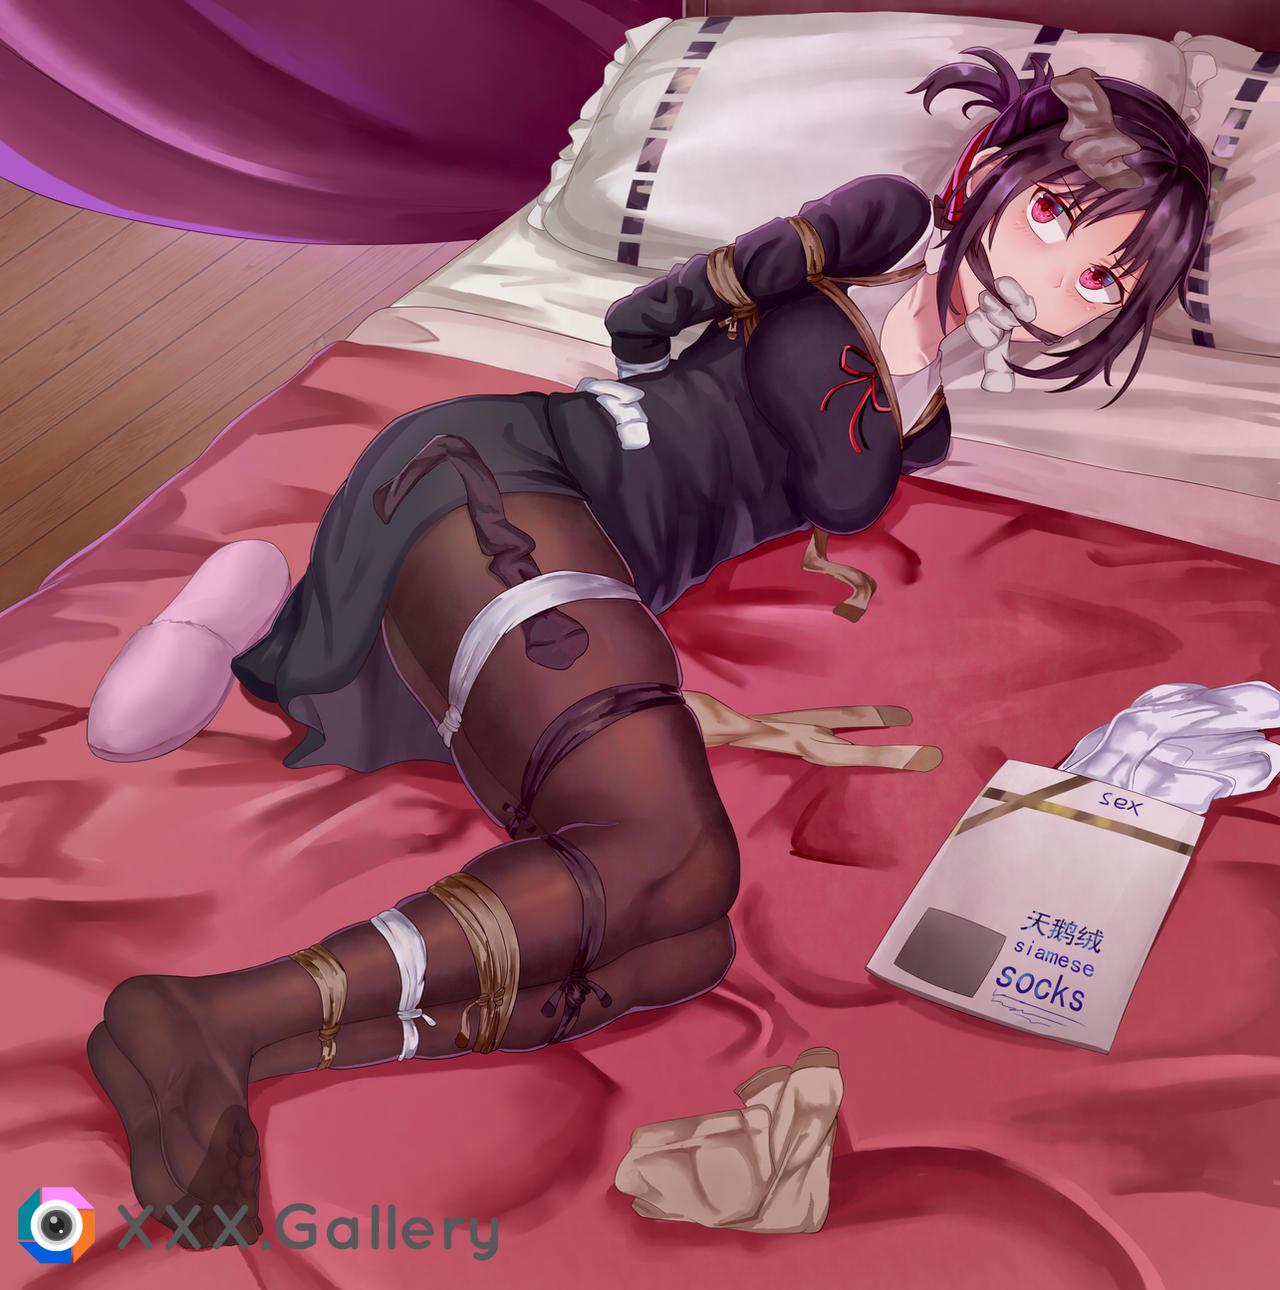 Tied up on your bed